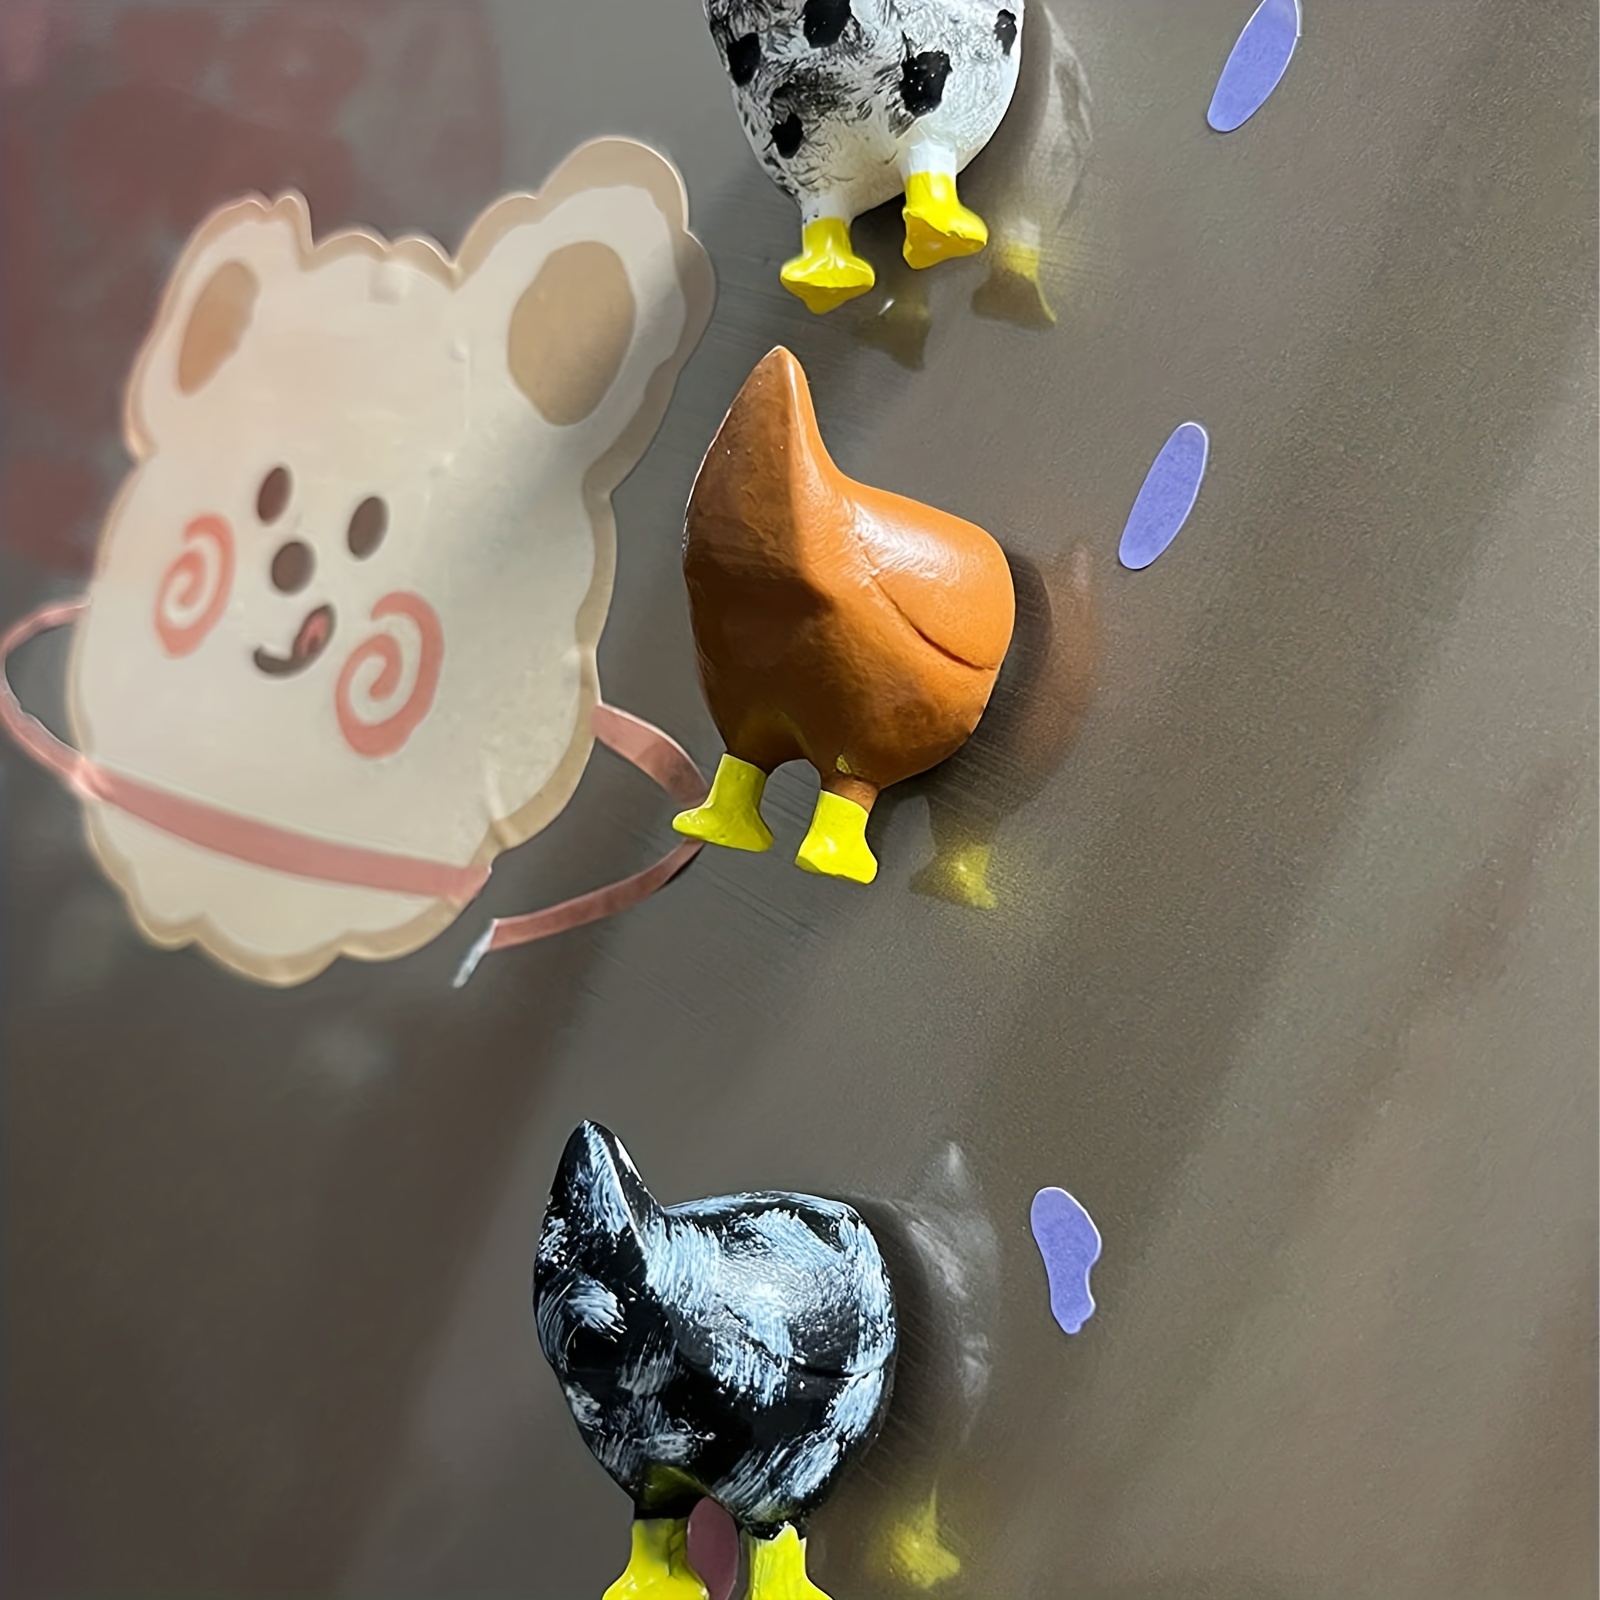  Farmhouse Style Decor 3pcs/Set Chicken Butt Fridge Magnets  Funny Animal Decor Gift Creative Refrigerator Magnets Home Accessories  Chick Butt Magnet Mix Color : Home & Kitchen